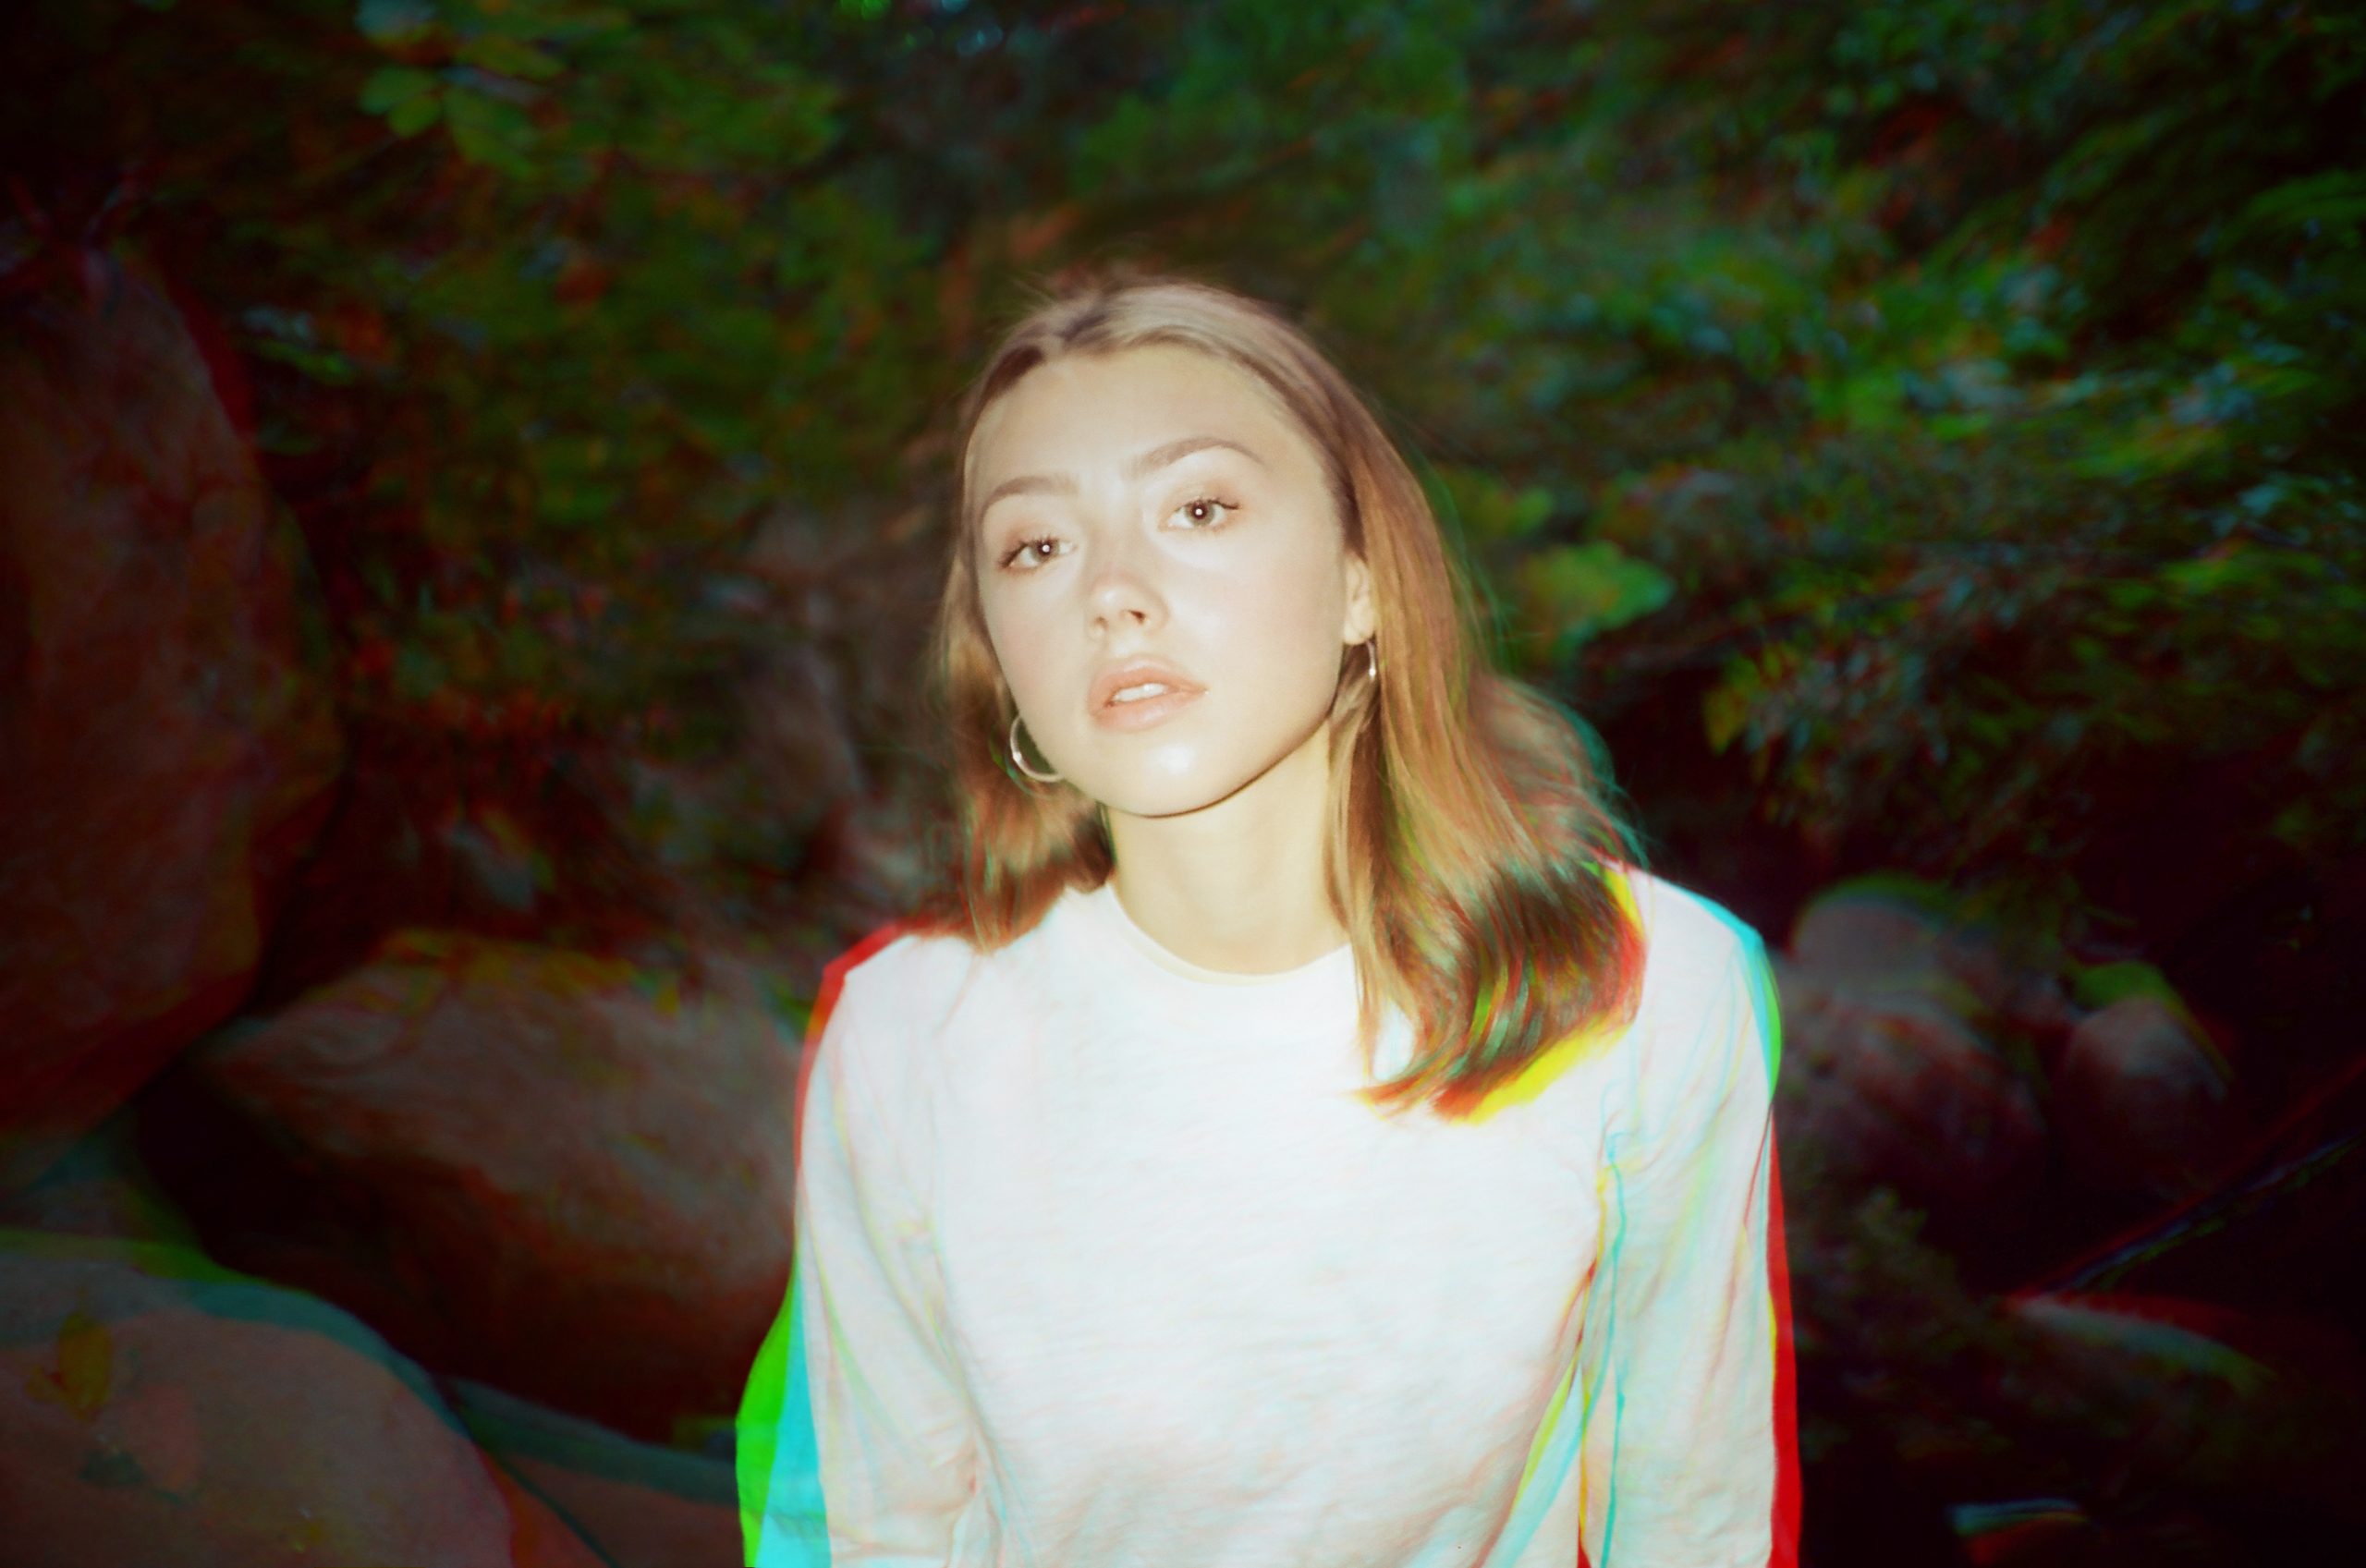 BAKER GRACE DEBUTS VISUALS FOR ‘SEE THE FUTURE’